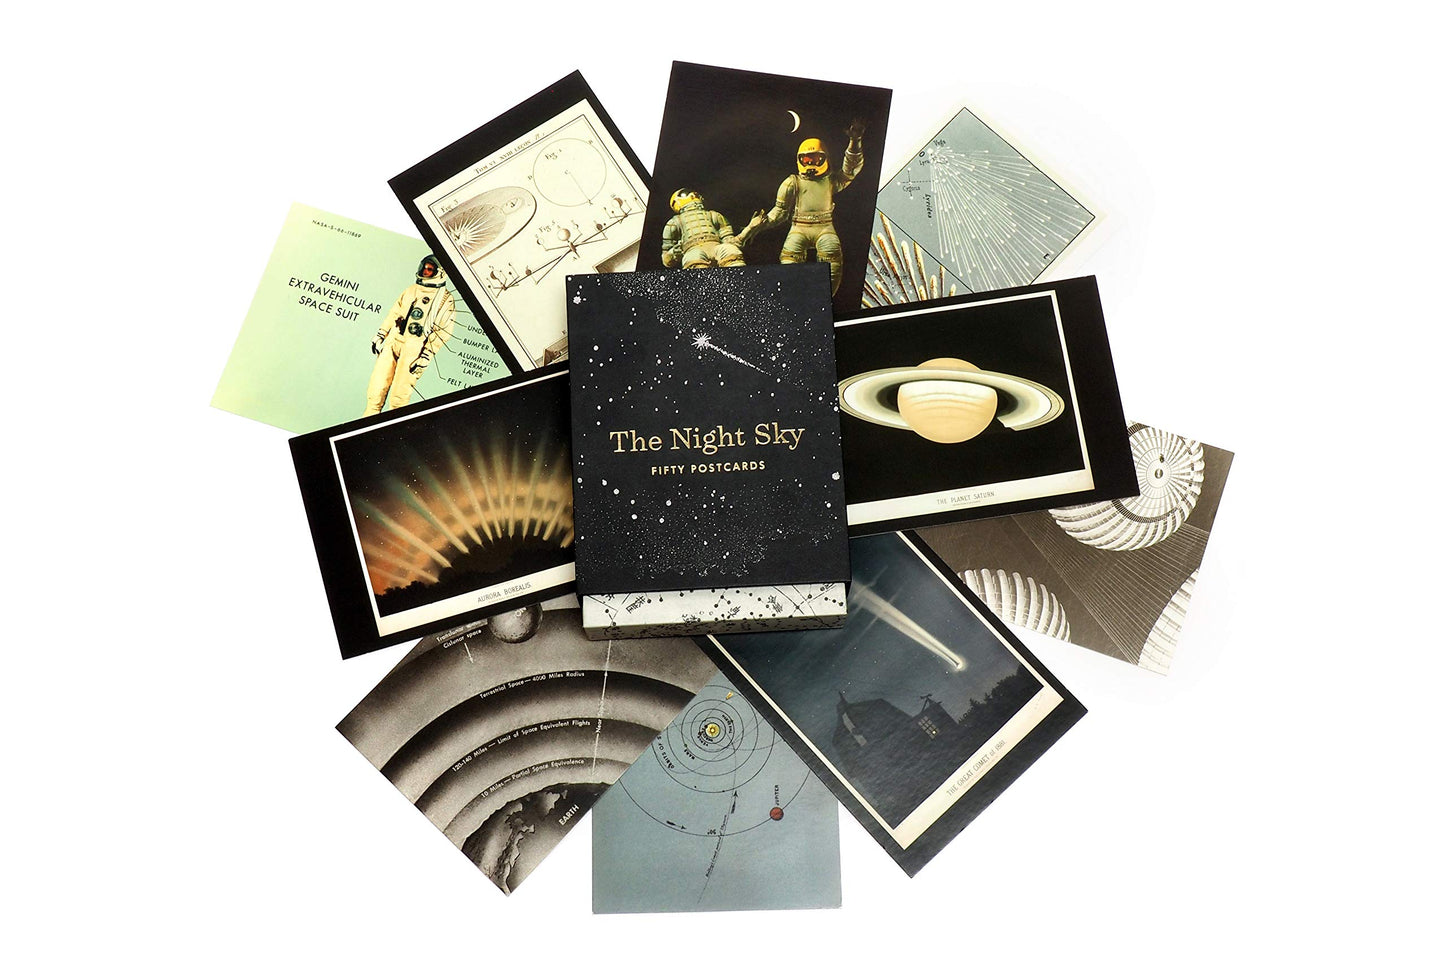 The Night Sky: Fifty Postcards